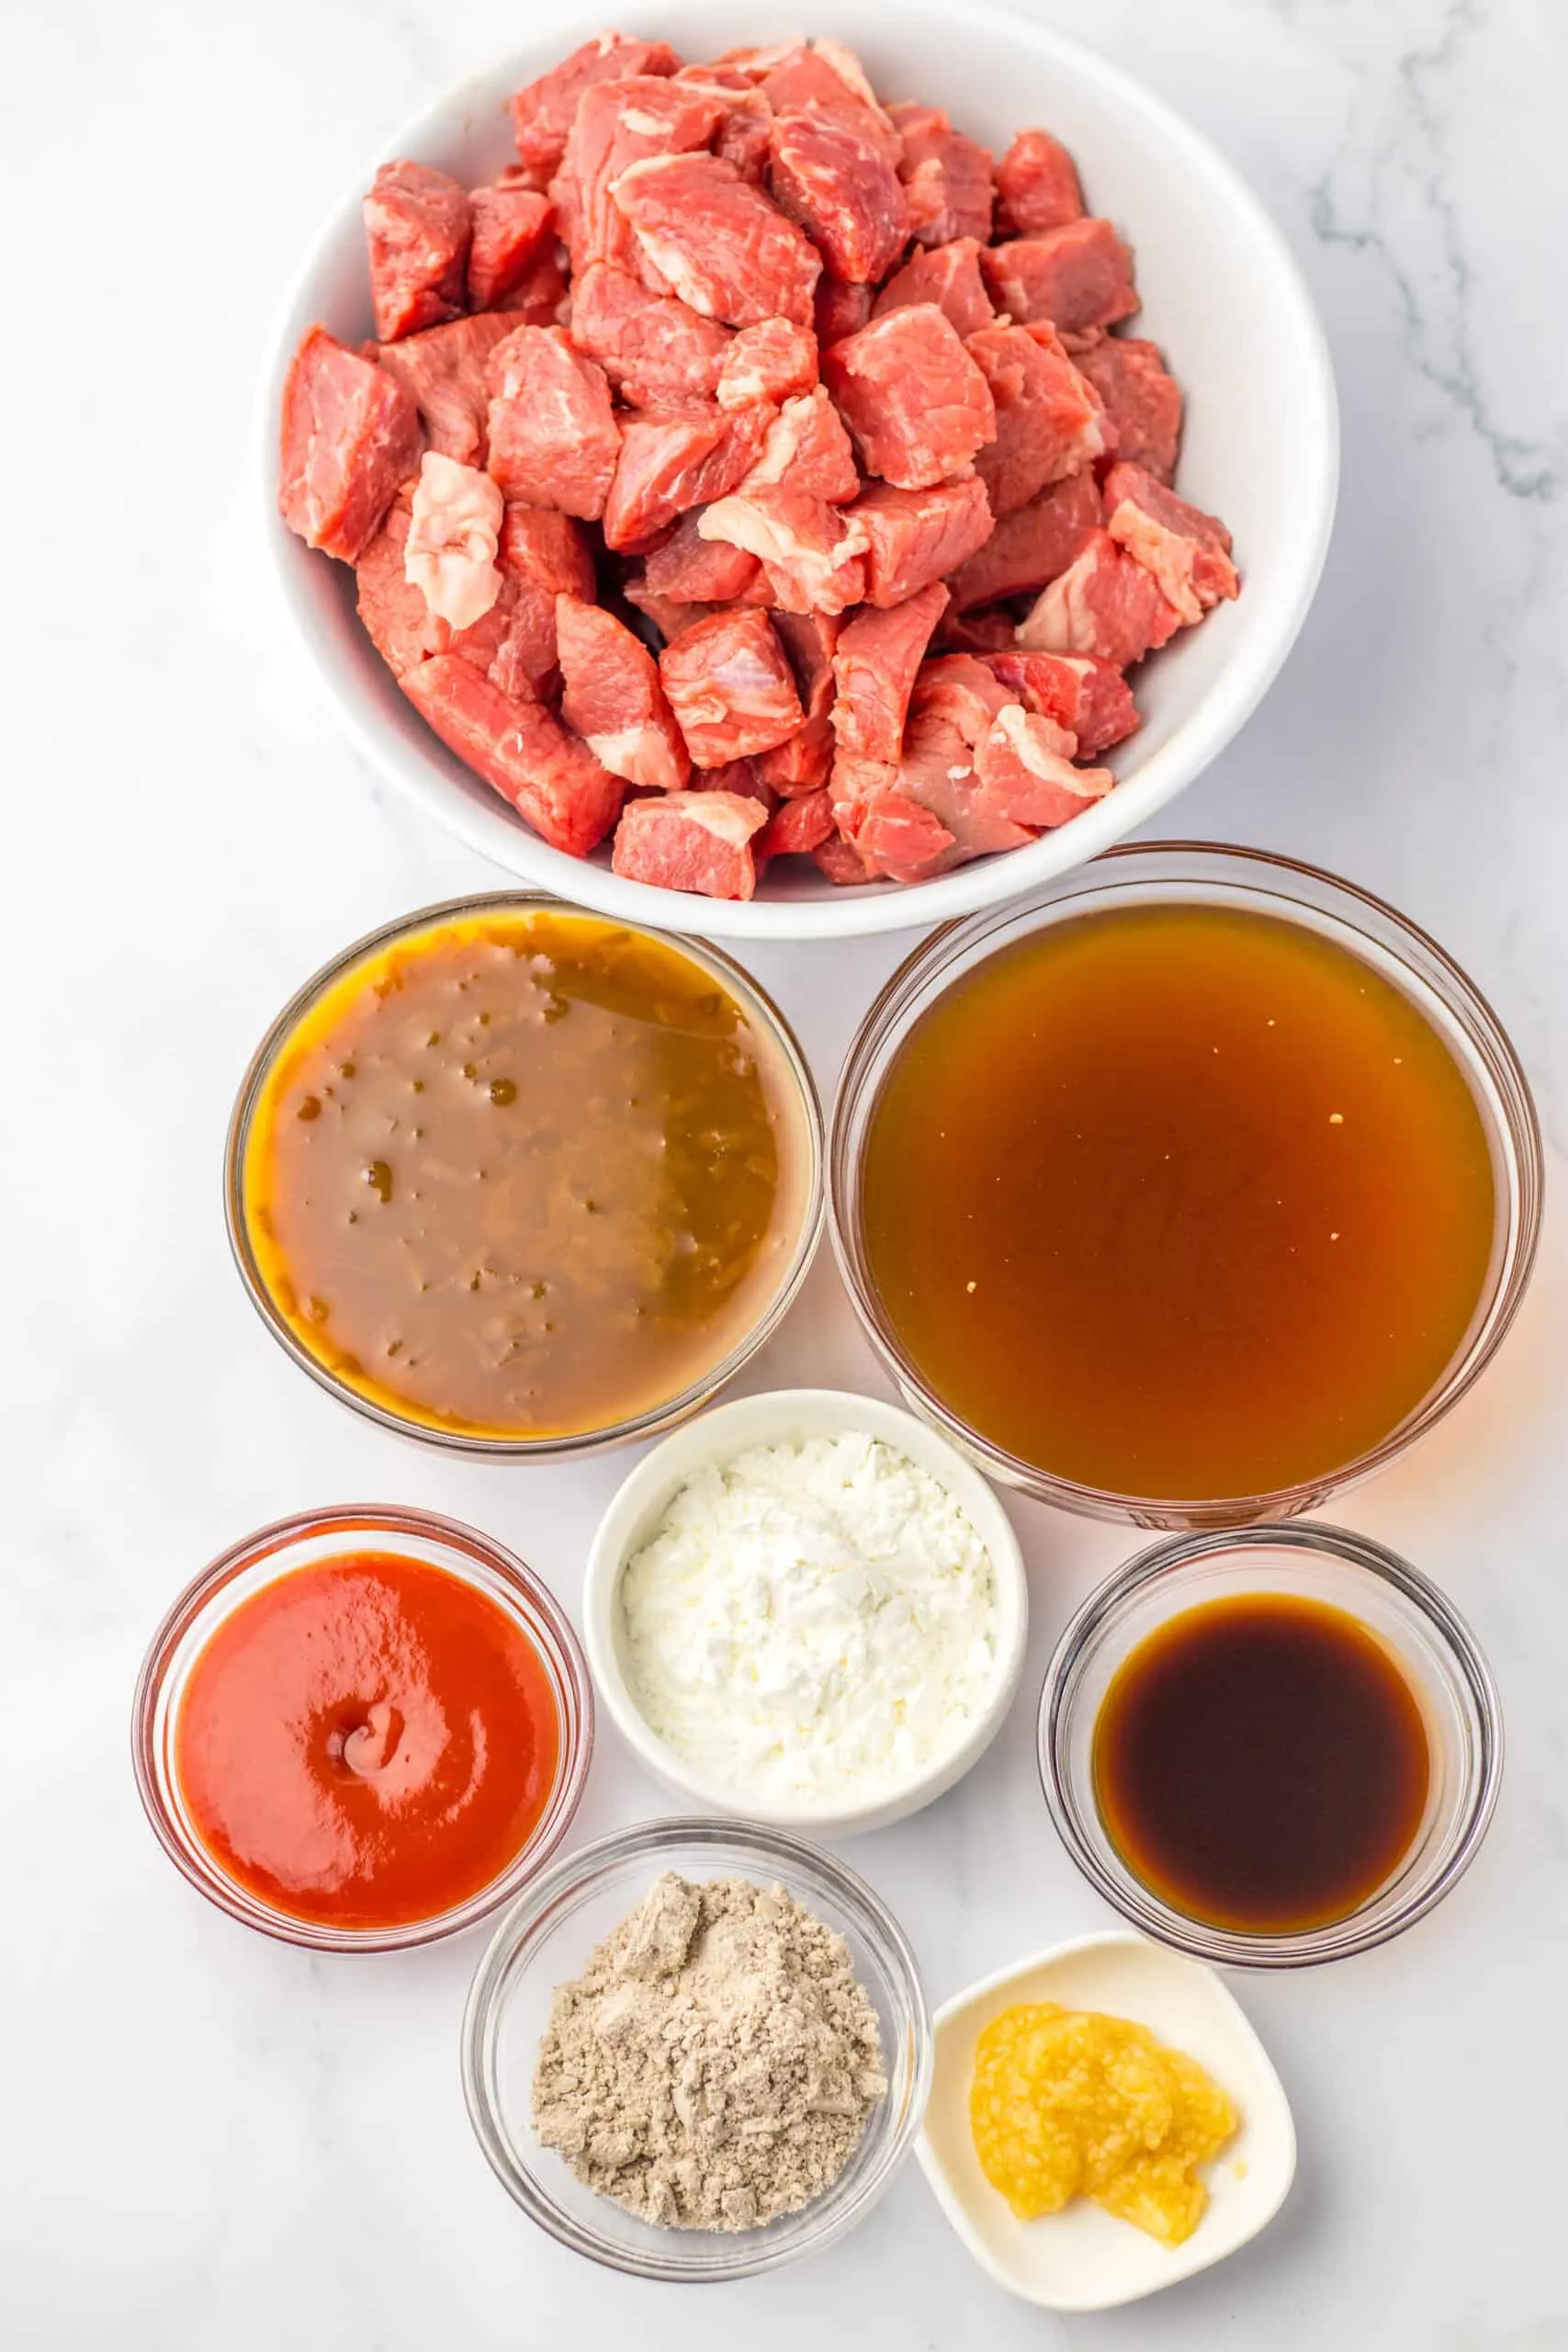 Ingredients for slow cooker beef tips and gravy